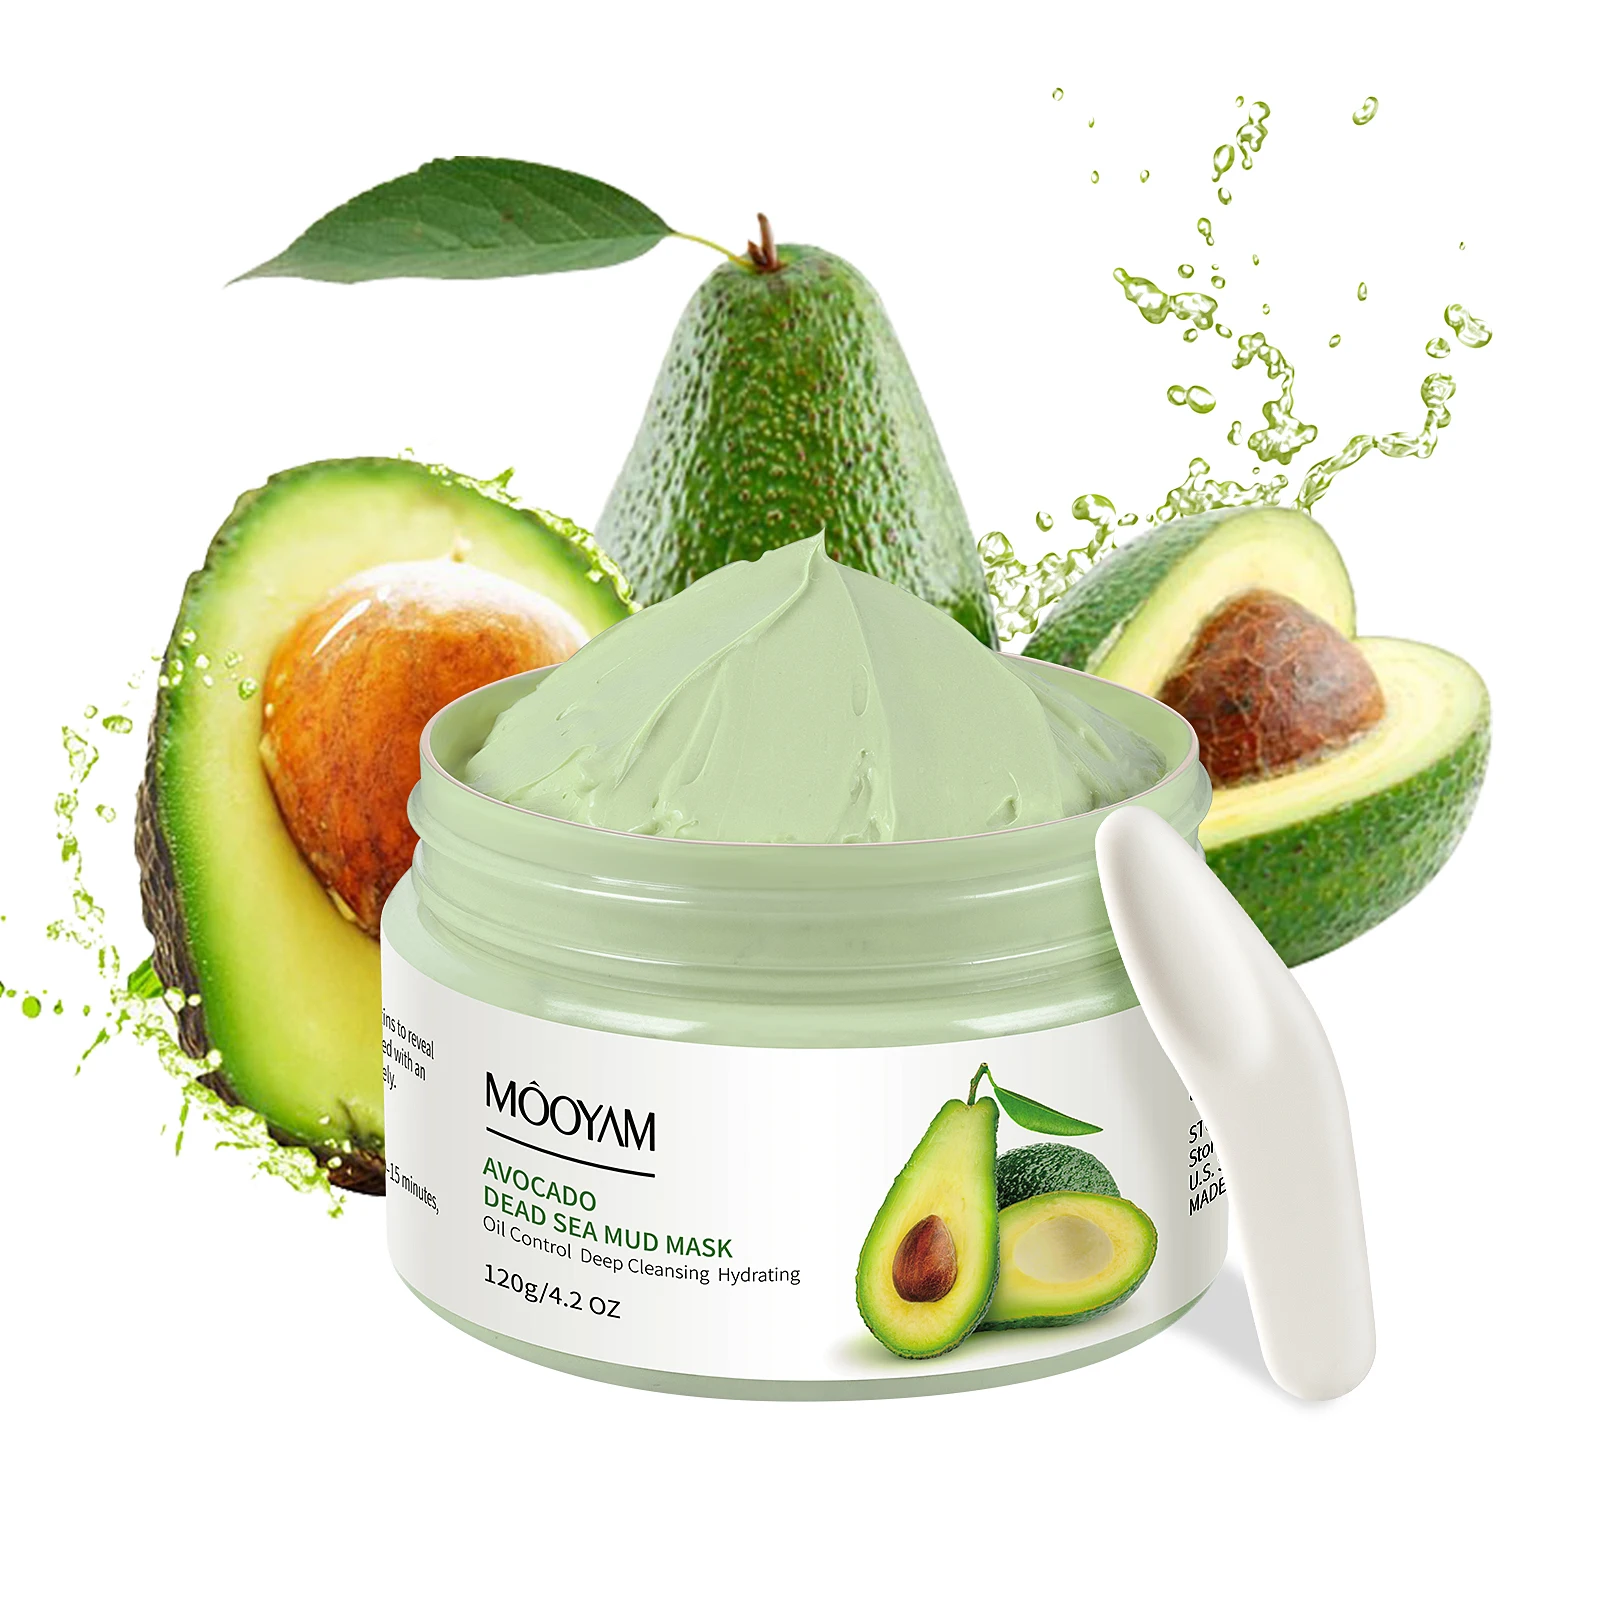 

MOOYAM Wholesale Nourishing Hydration Deep Cleansing Organic Avocado Vegan Dead Sea Mud Mask Facial Clay Mask for Face